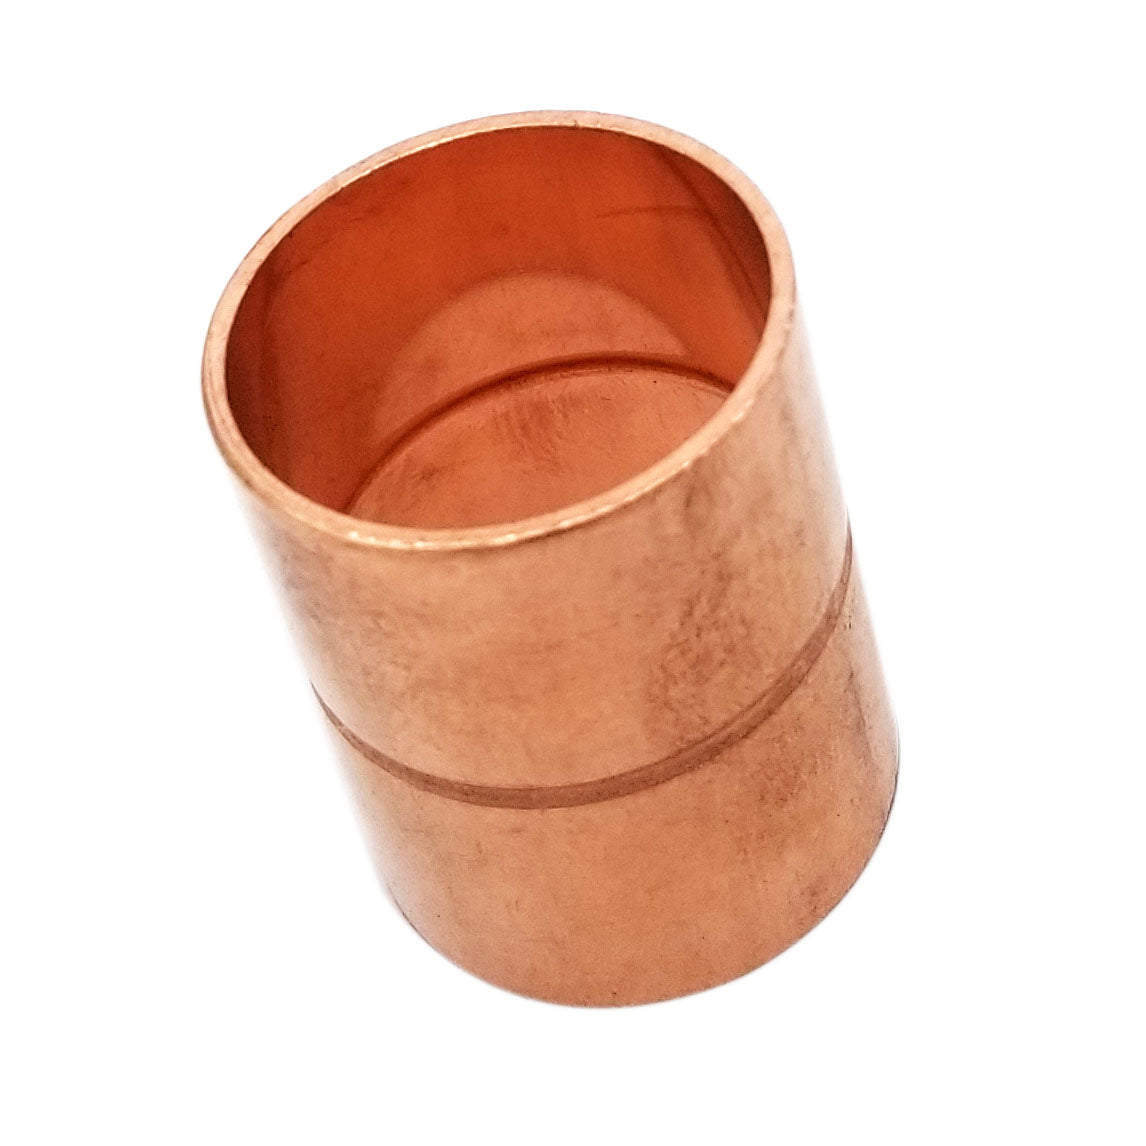 Copper Fitting 5/8 Inch (HVAC Outer Dimension) 1/2 Inch (Plumbing Inner Dimension) - Straight Copper Coupling Fittings With Rolled Tube Stop & HVAC – 99.9% Pure Copper - 10 Pack